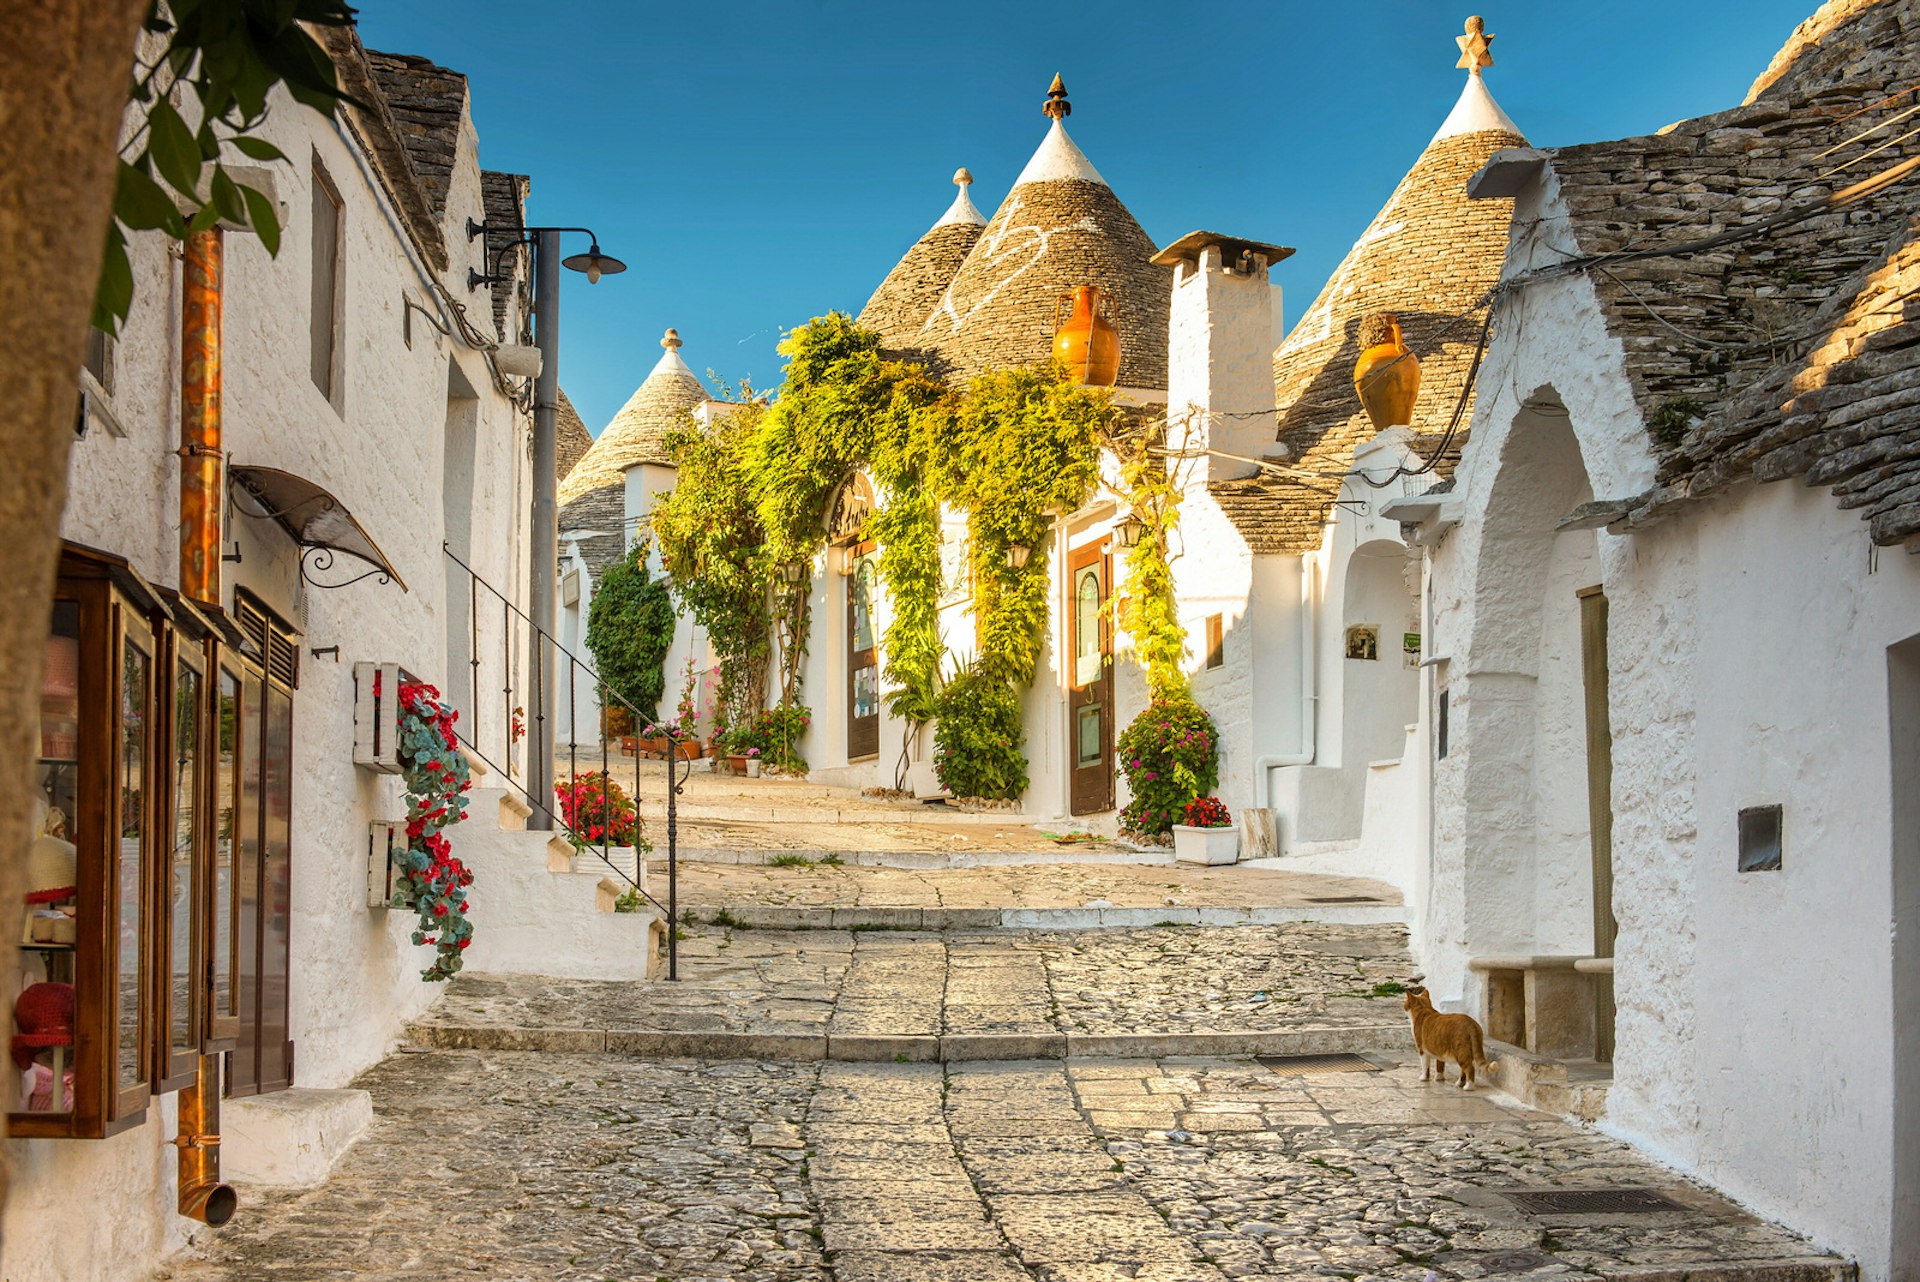 A cat looks up a picturesque street of trulli, with their conical roofs